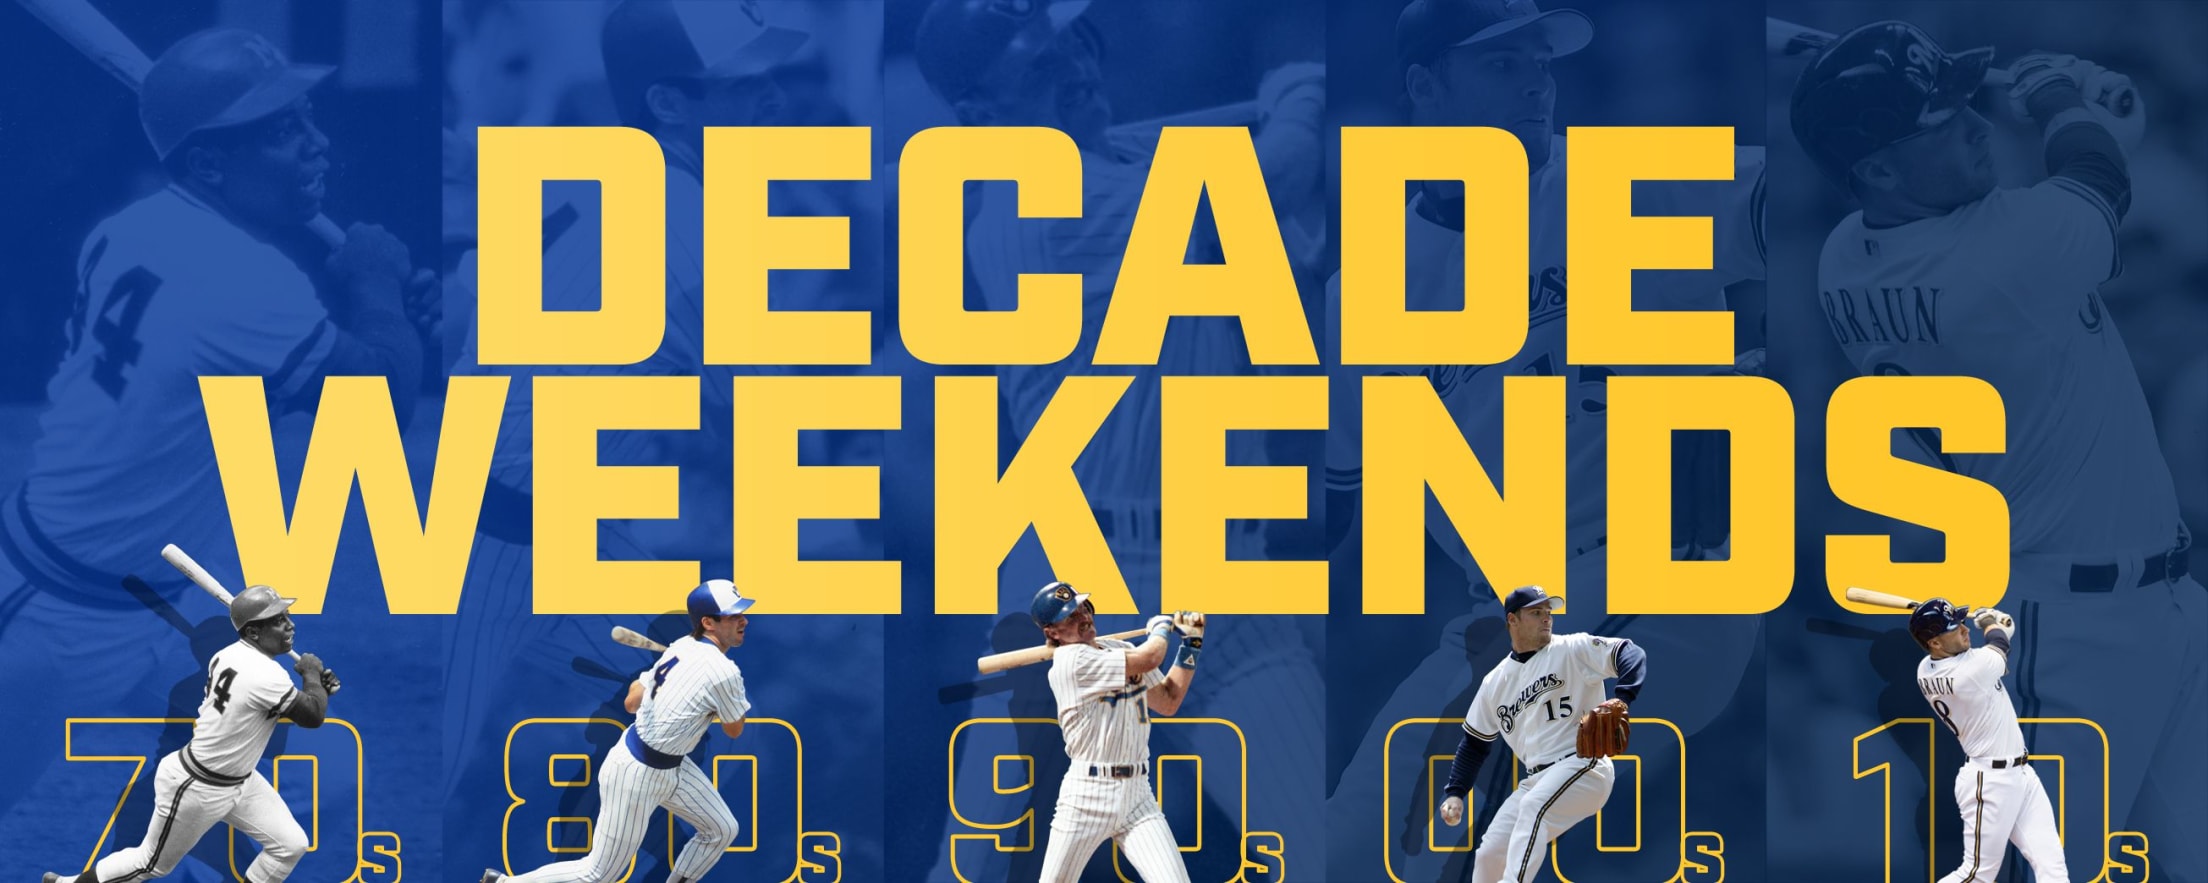 Brewers celebrate 50th anniversary with special throwback decade weekends